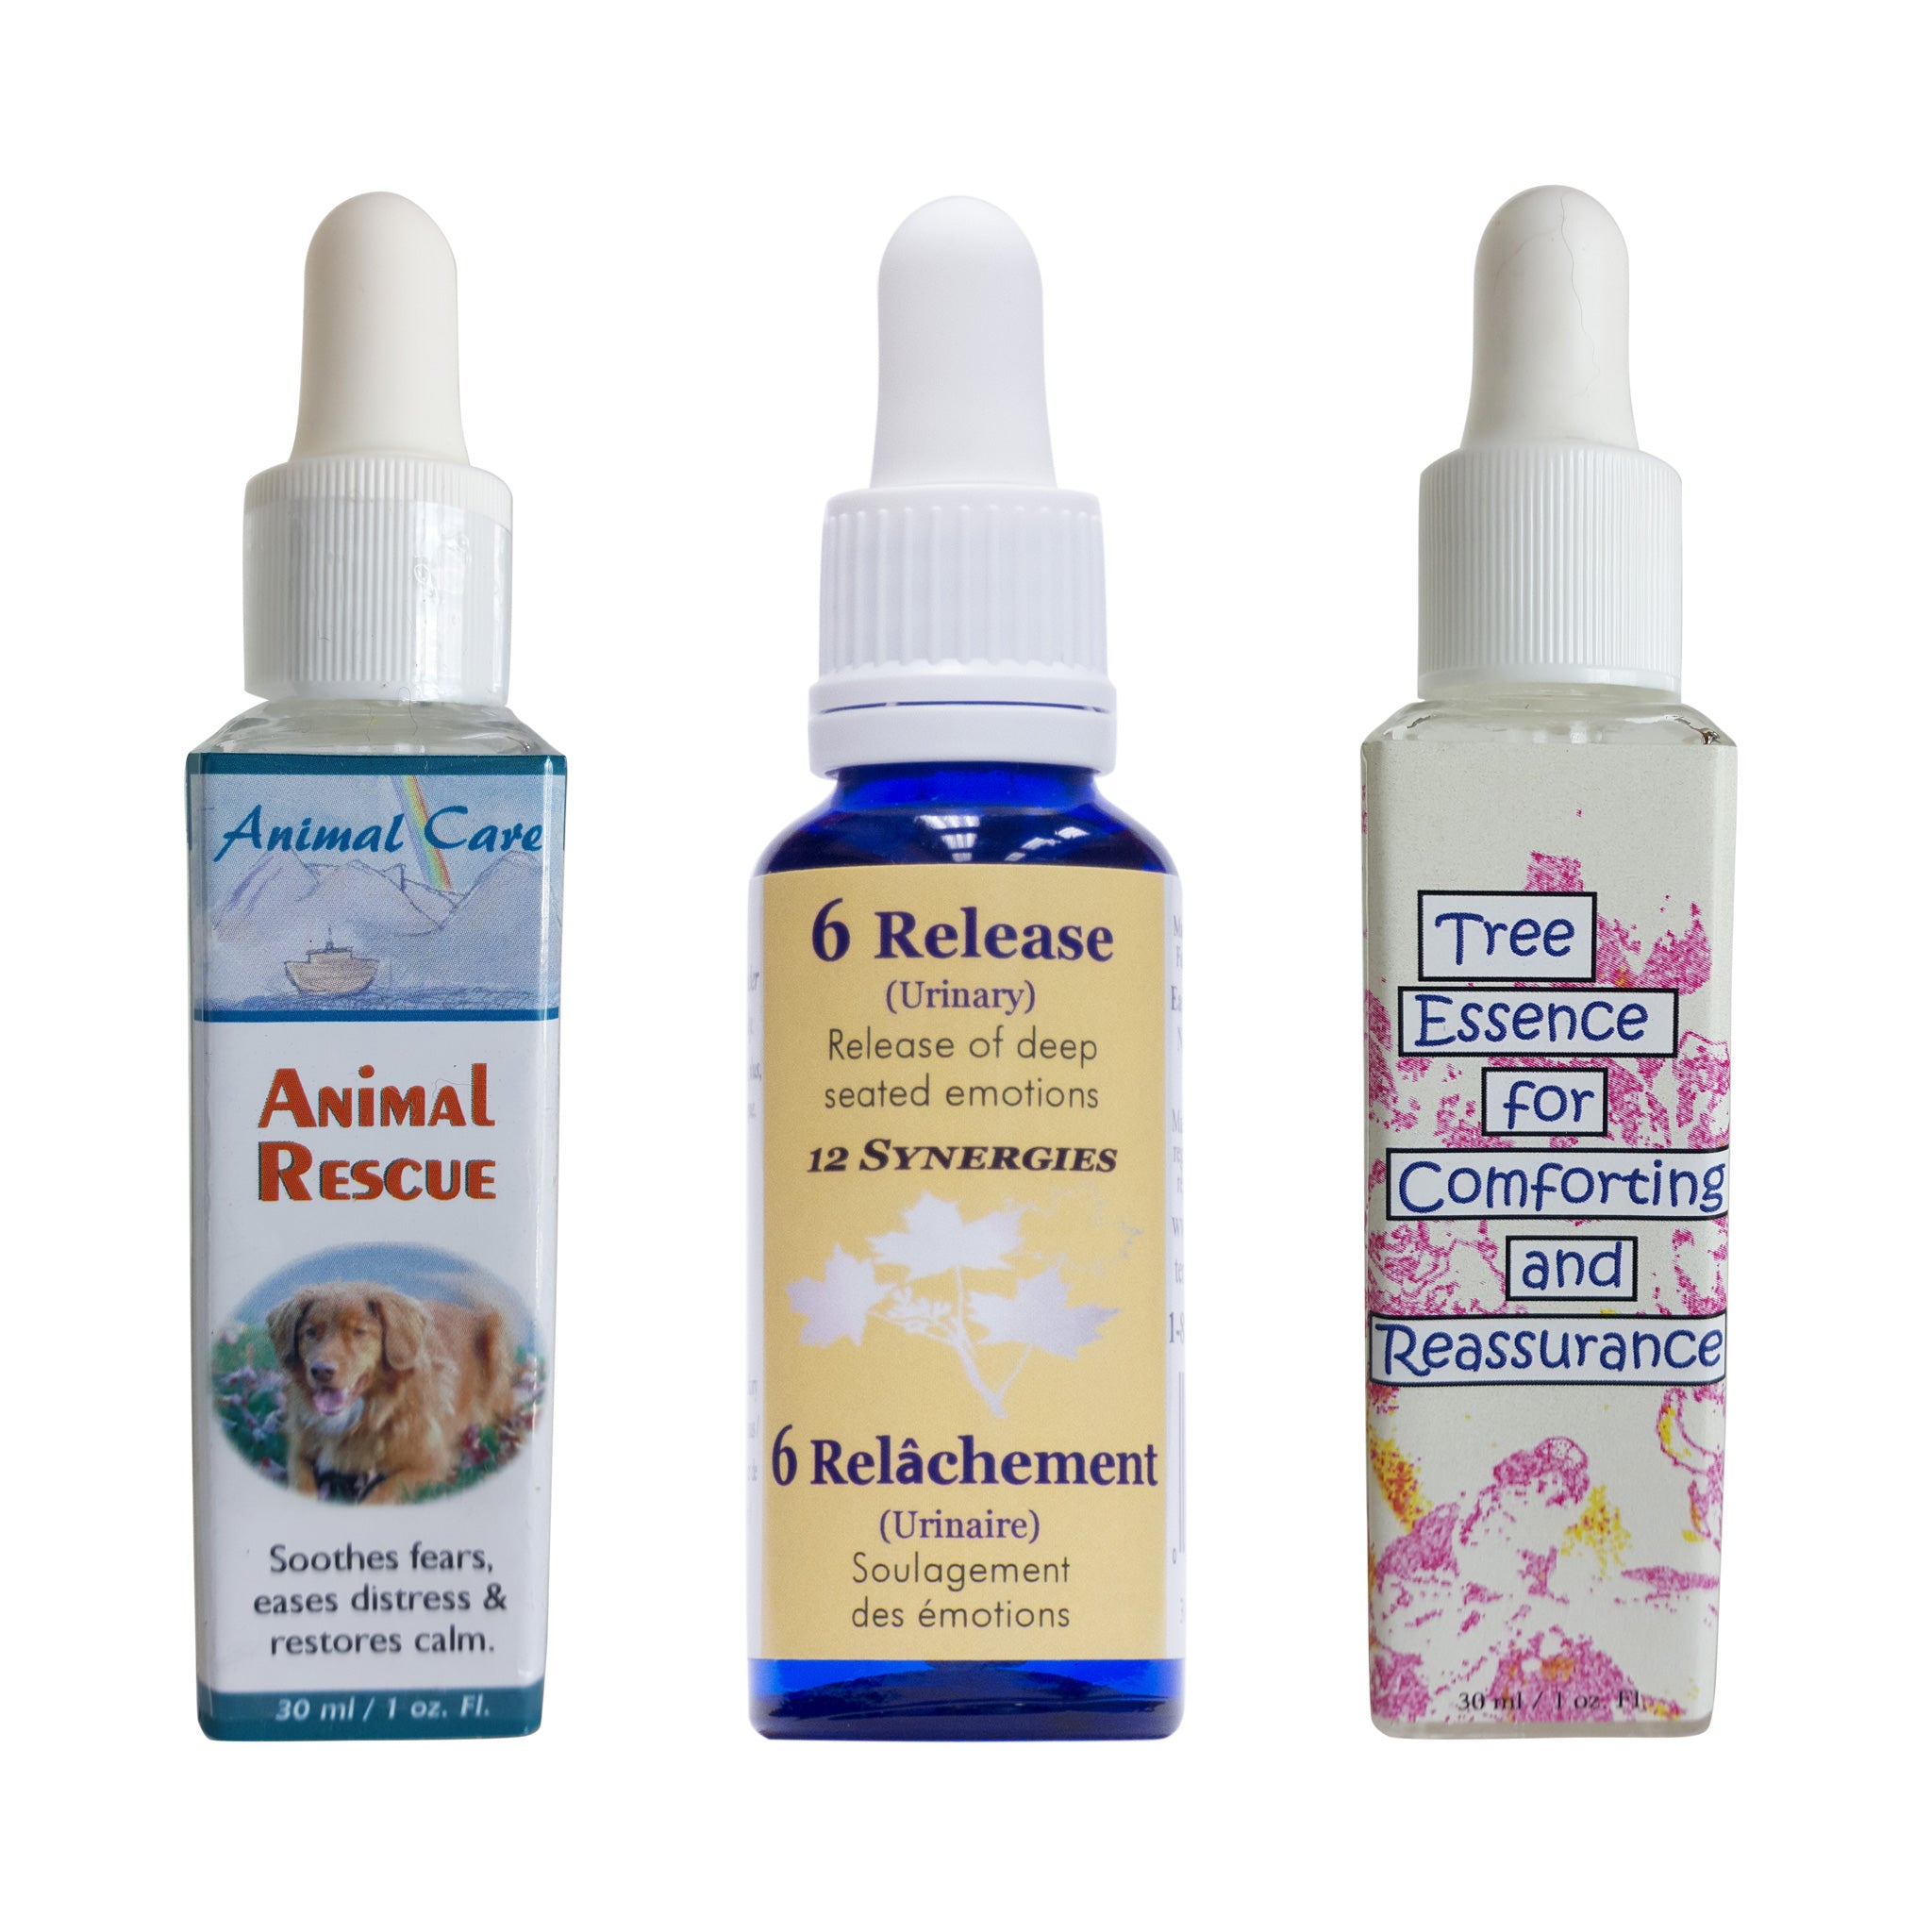 Trilogy of Essences for Animal Peeing